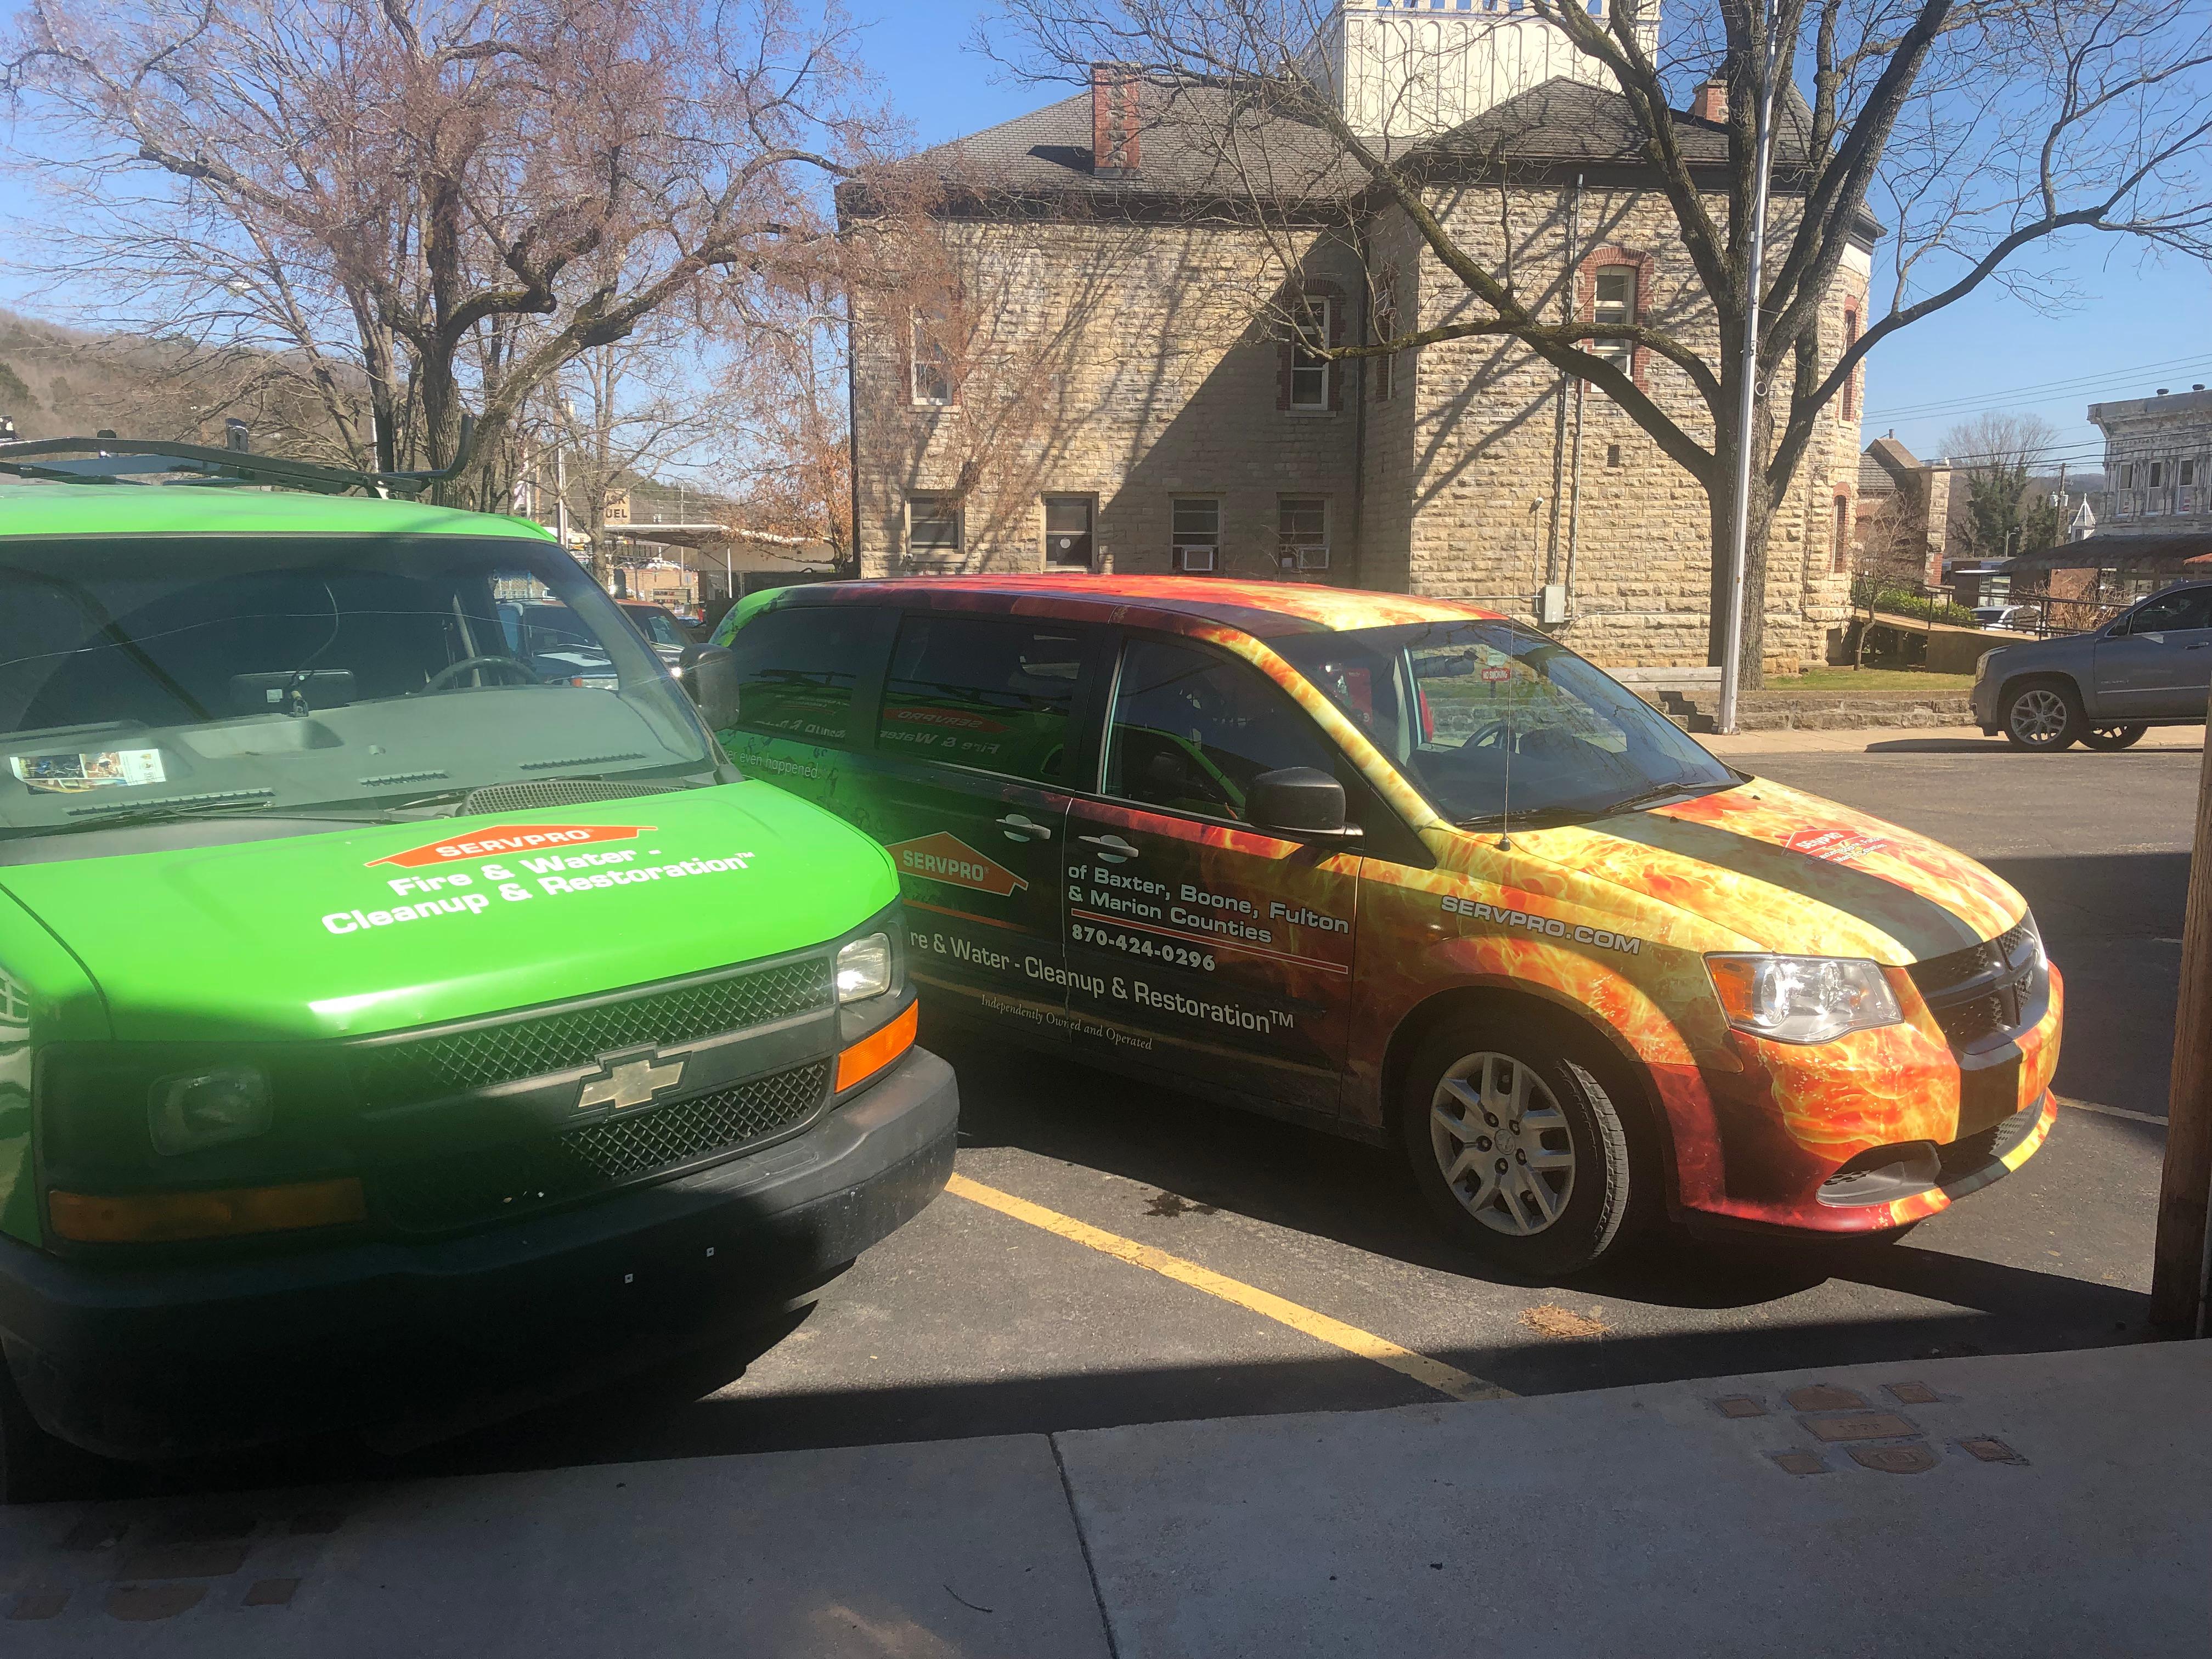 Some of our clearly branded vehicles you will see all over North Central Arkansas.